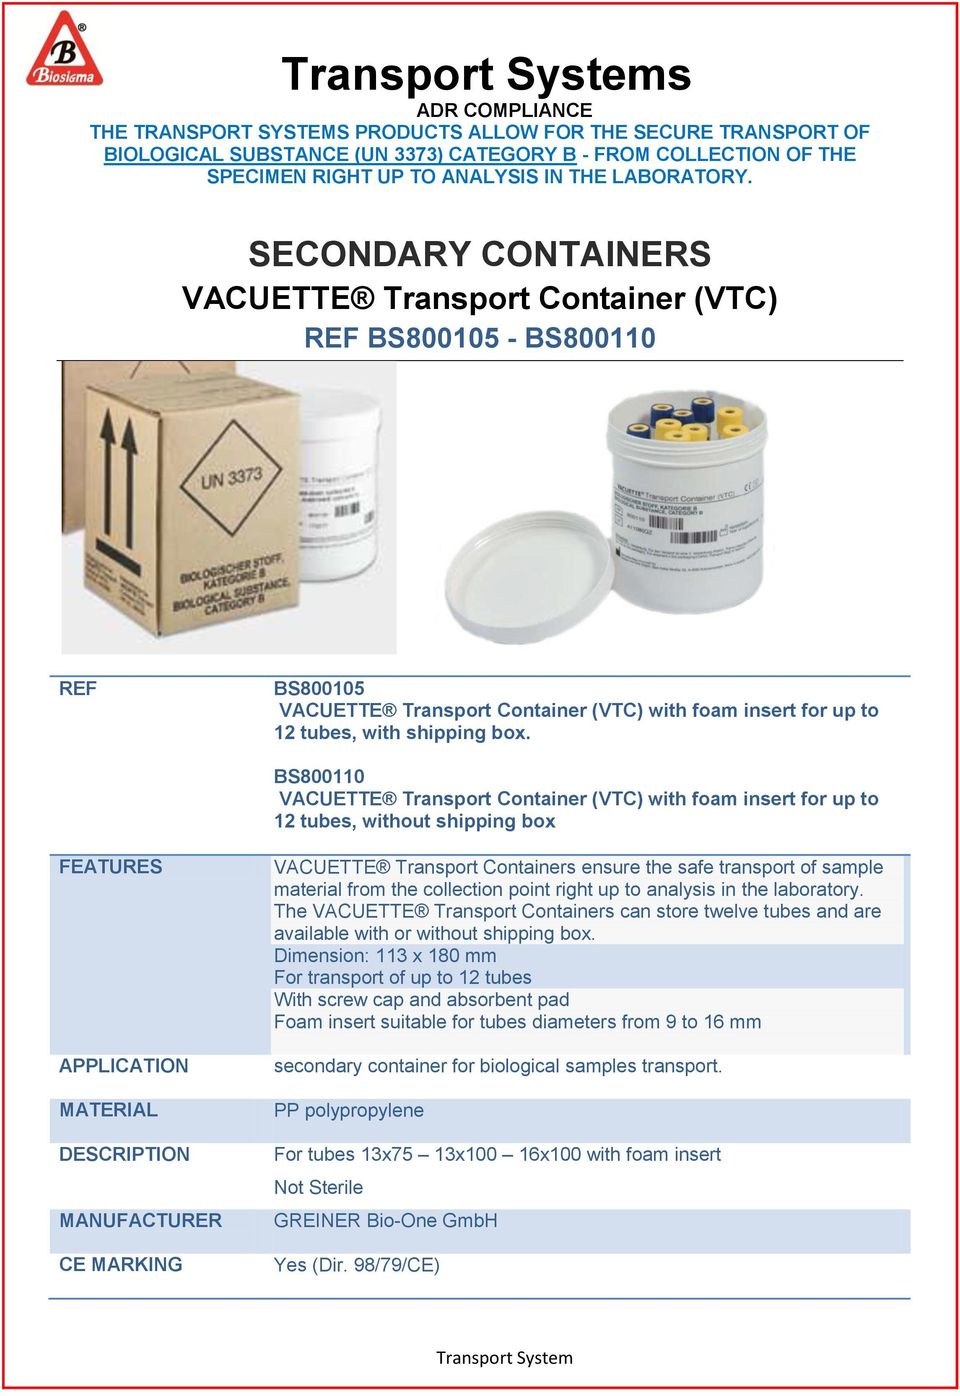 BS800110 VACUETTE Transport Container (VTC) with foam insert for up to 12 tubes, without shipping box FEATURES APPLICATION MATERIAL DESCRIPTION MANUFACTURER CE MARKING VACUETTE Transport Containers